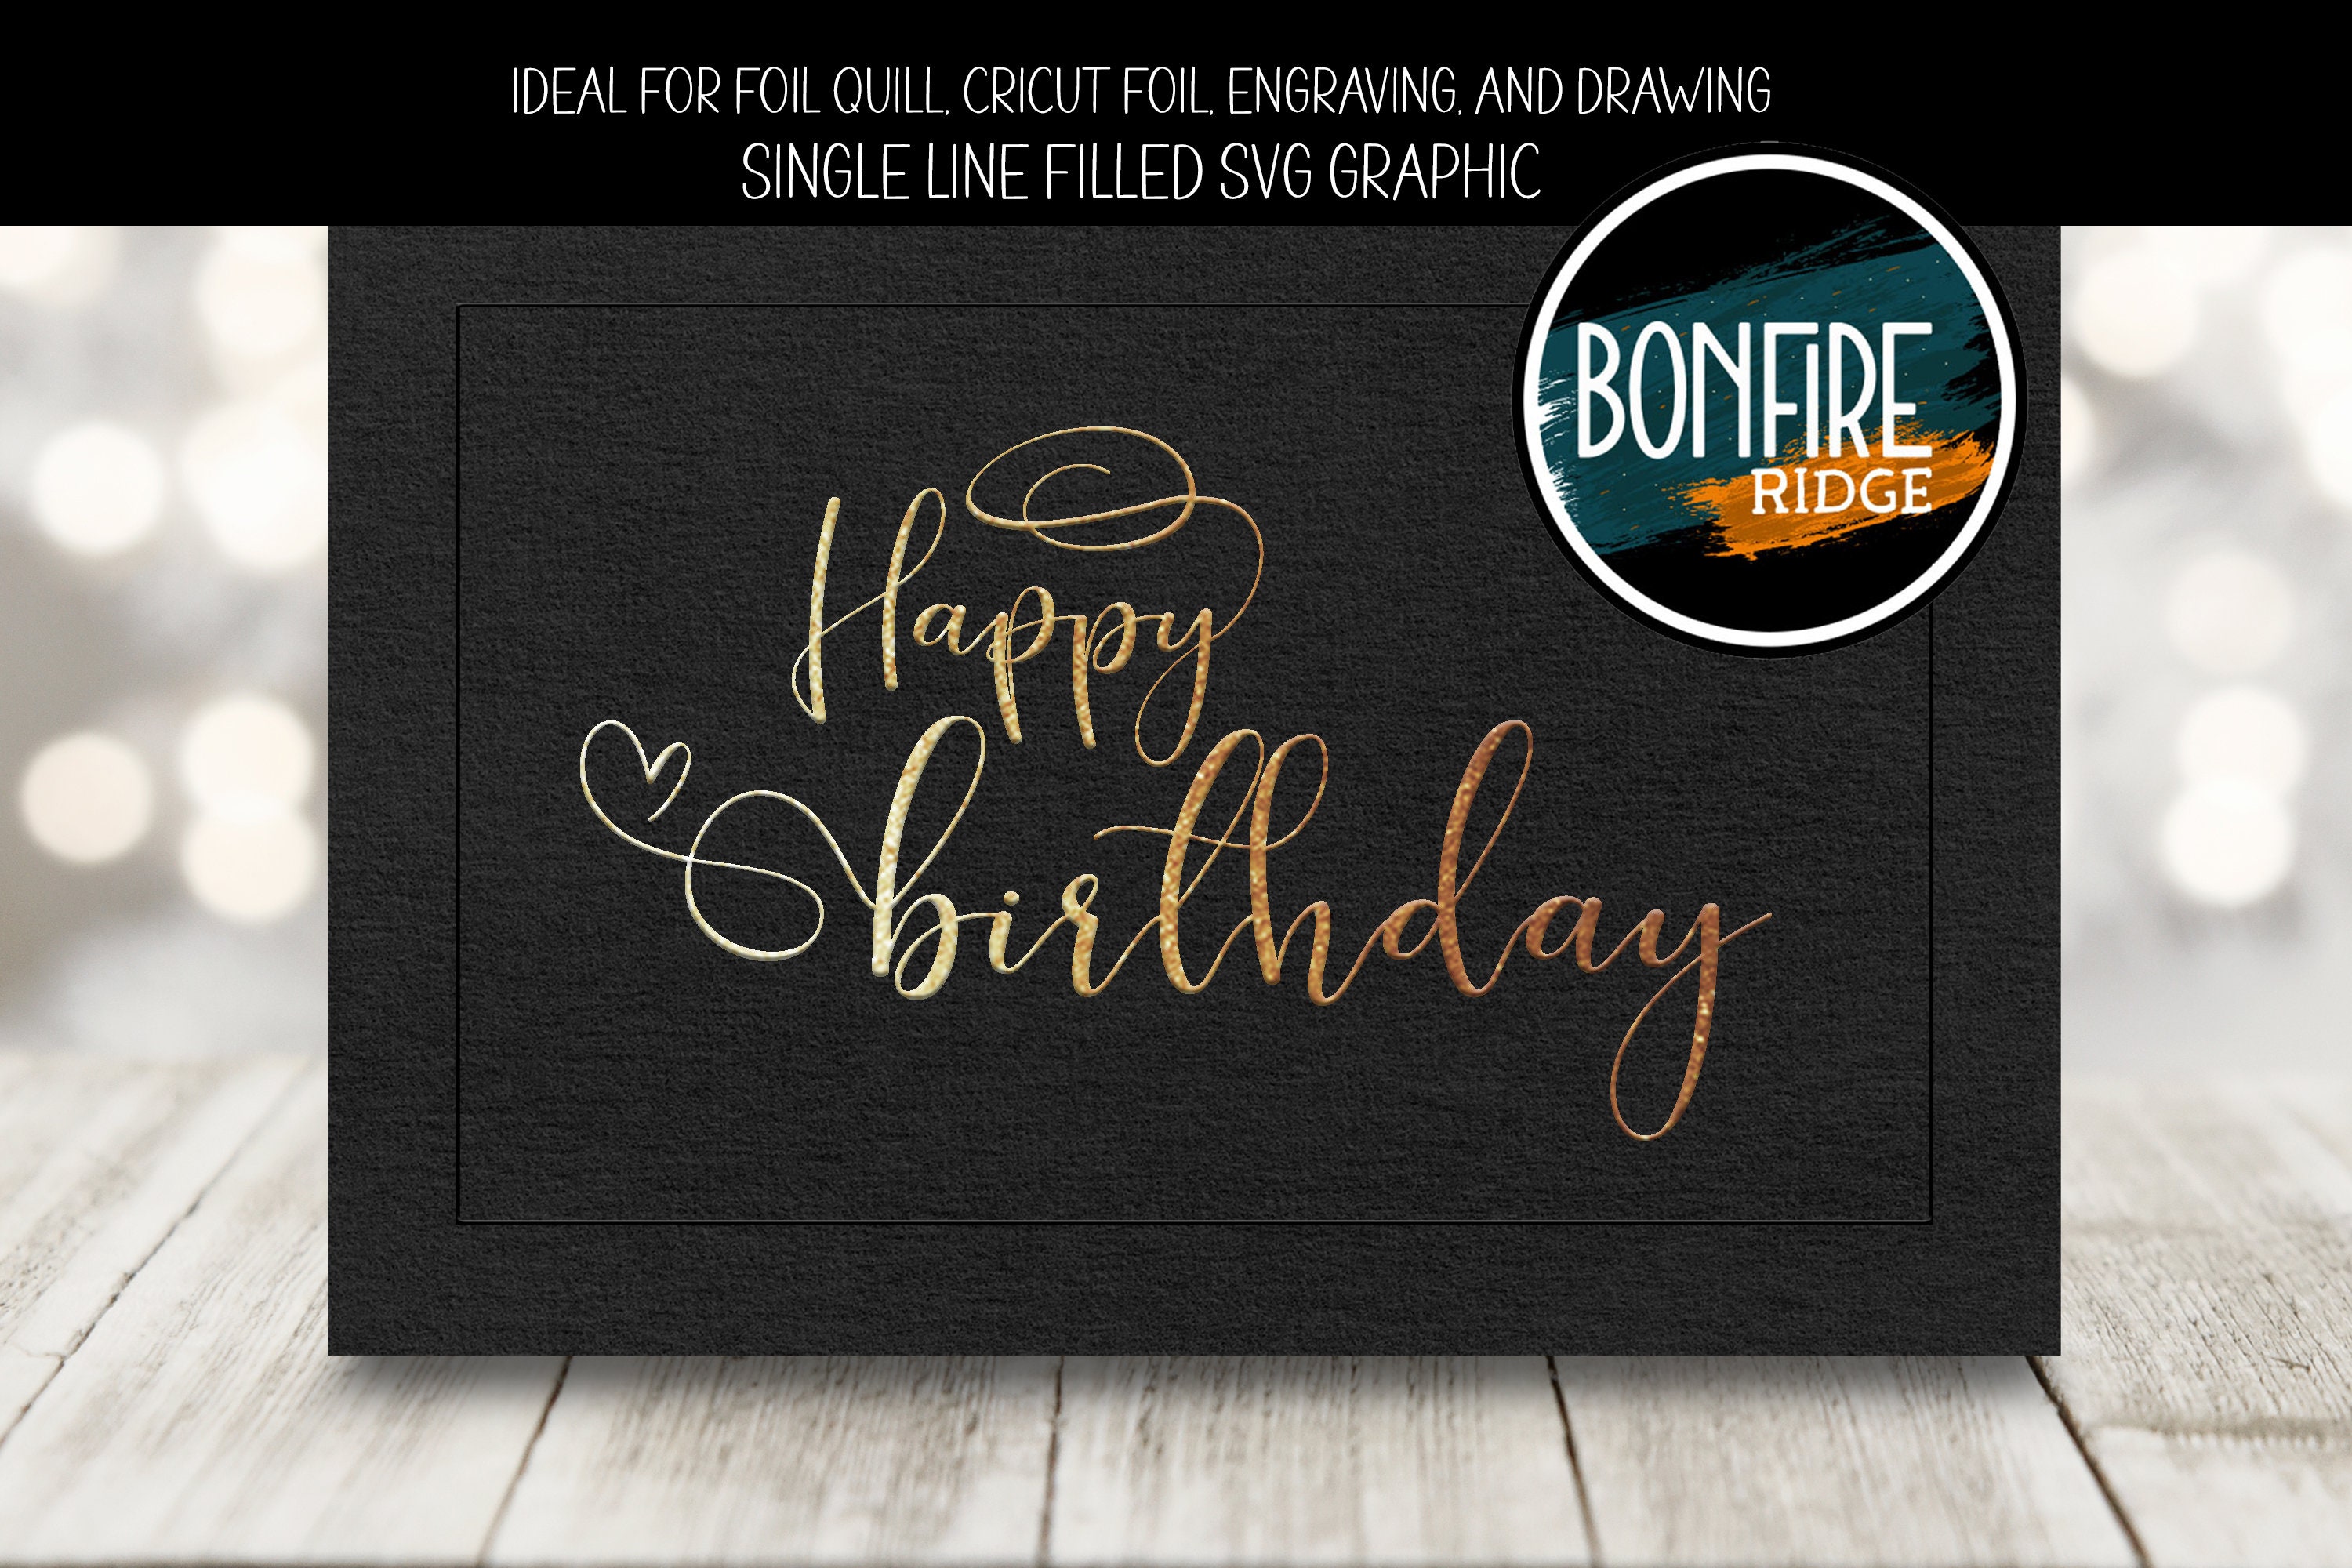 Foil Quill Filled SVG Single Line Happy Birthday Graphic 